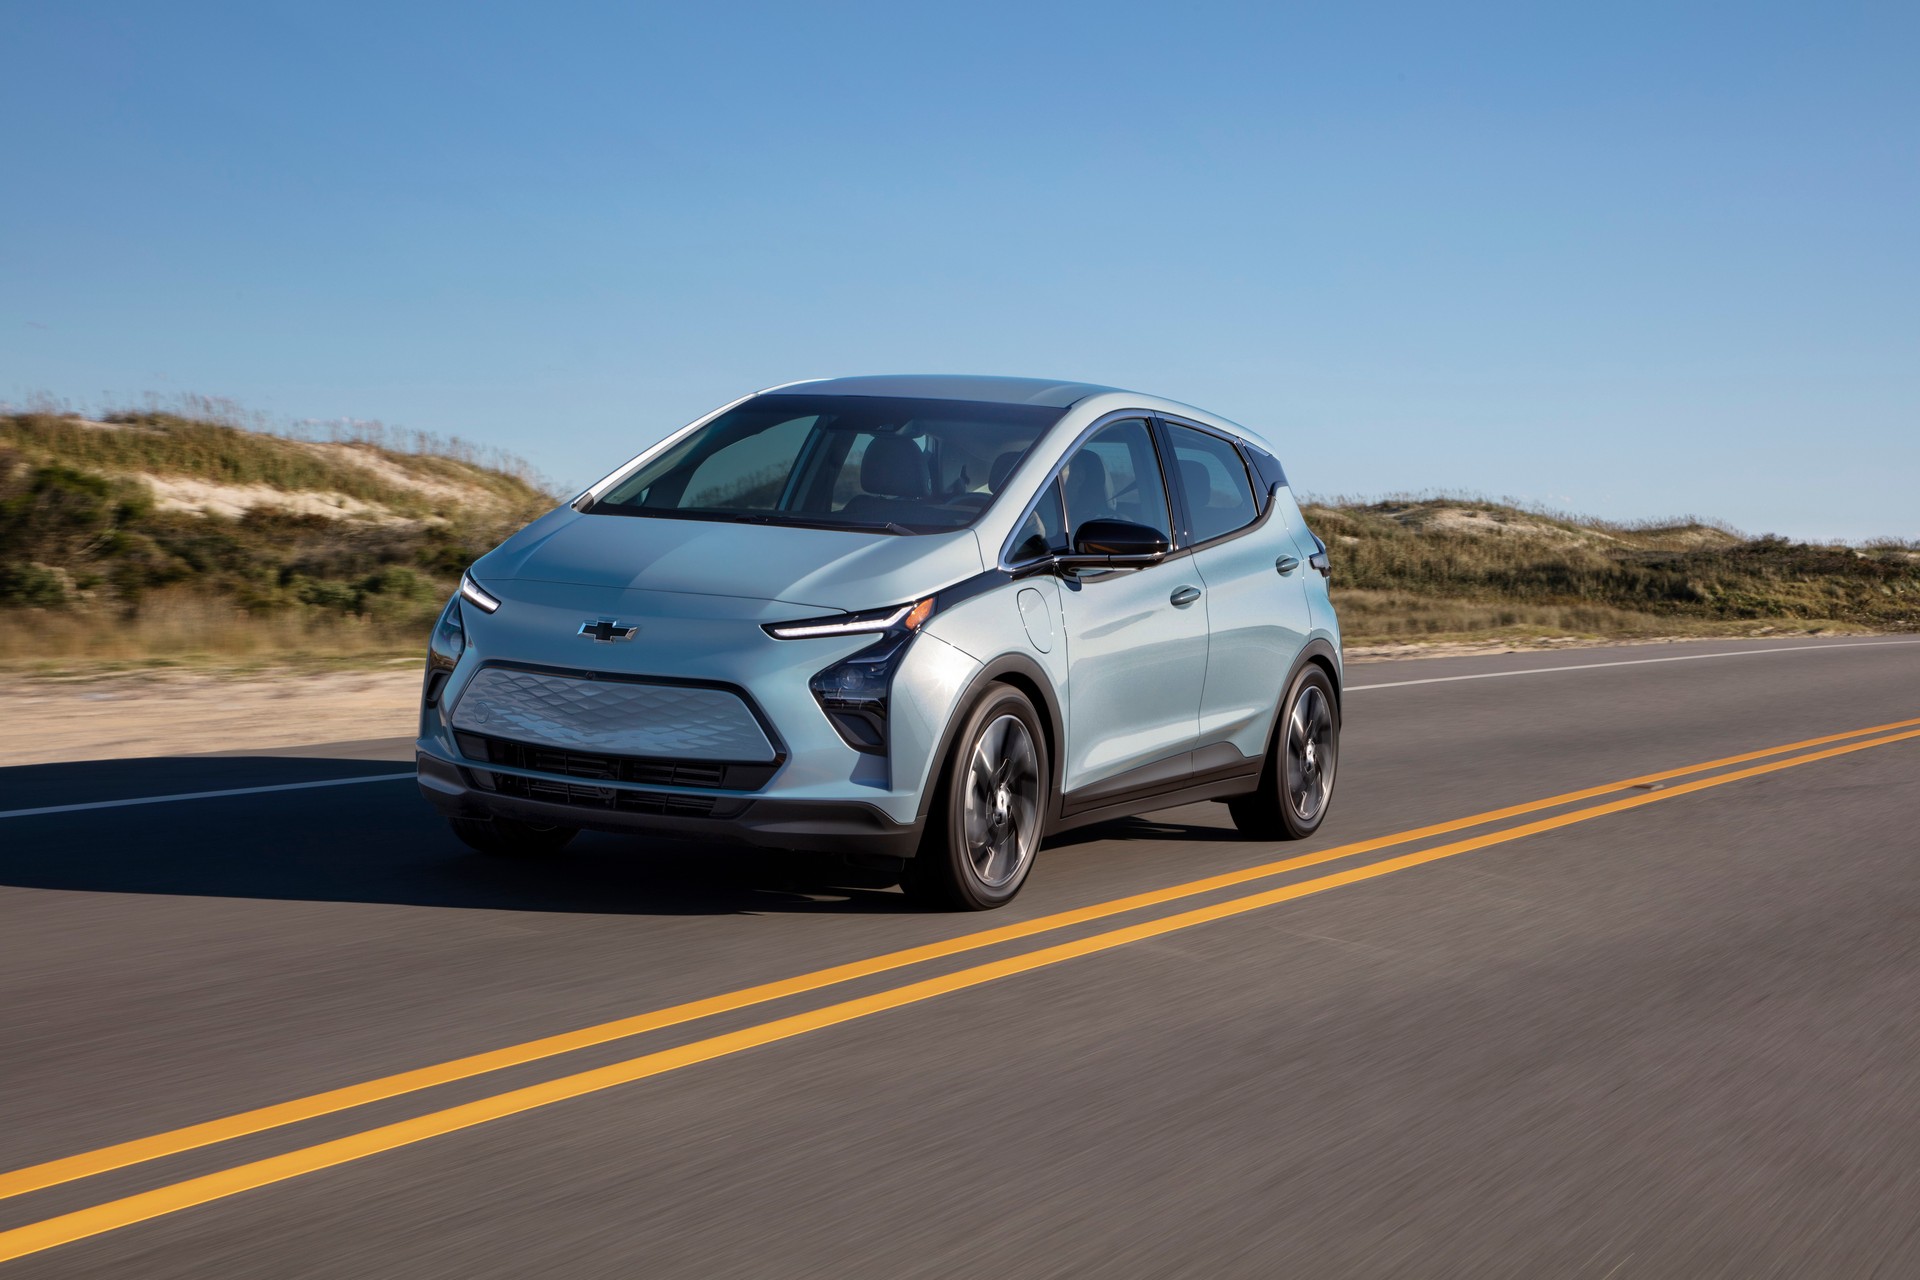 The 2022 Chevrolet Bolt And Bolt EUV Combine Bold Styling With Up To